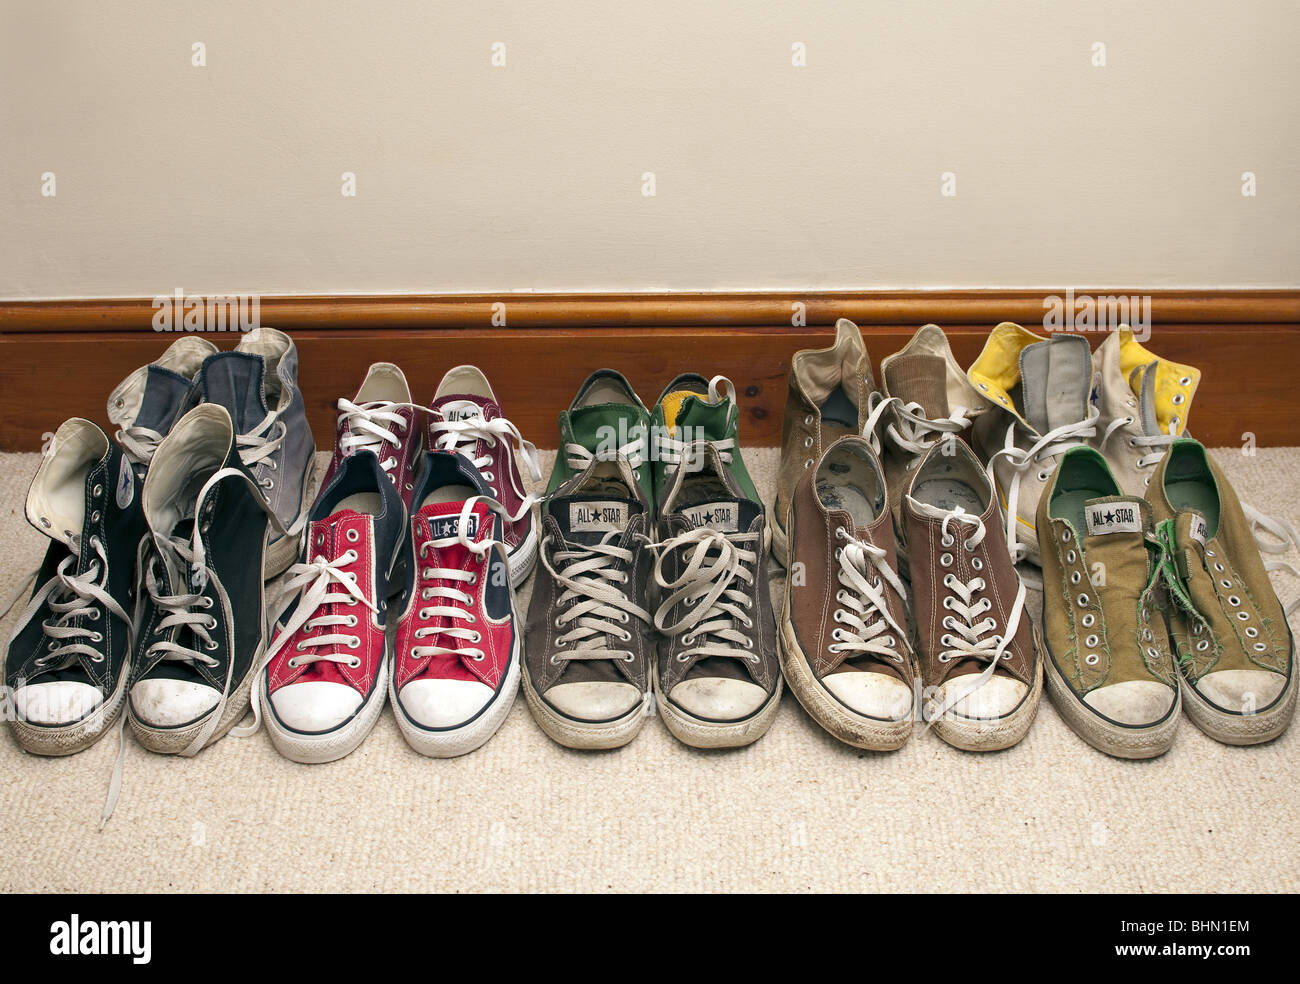 Converse All Star trainers collection Stock Photo - Alamy